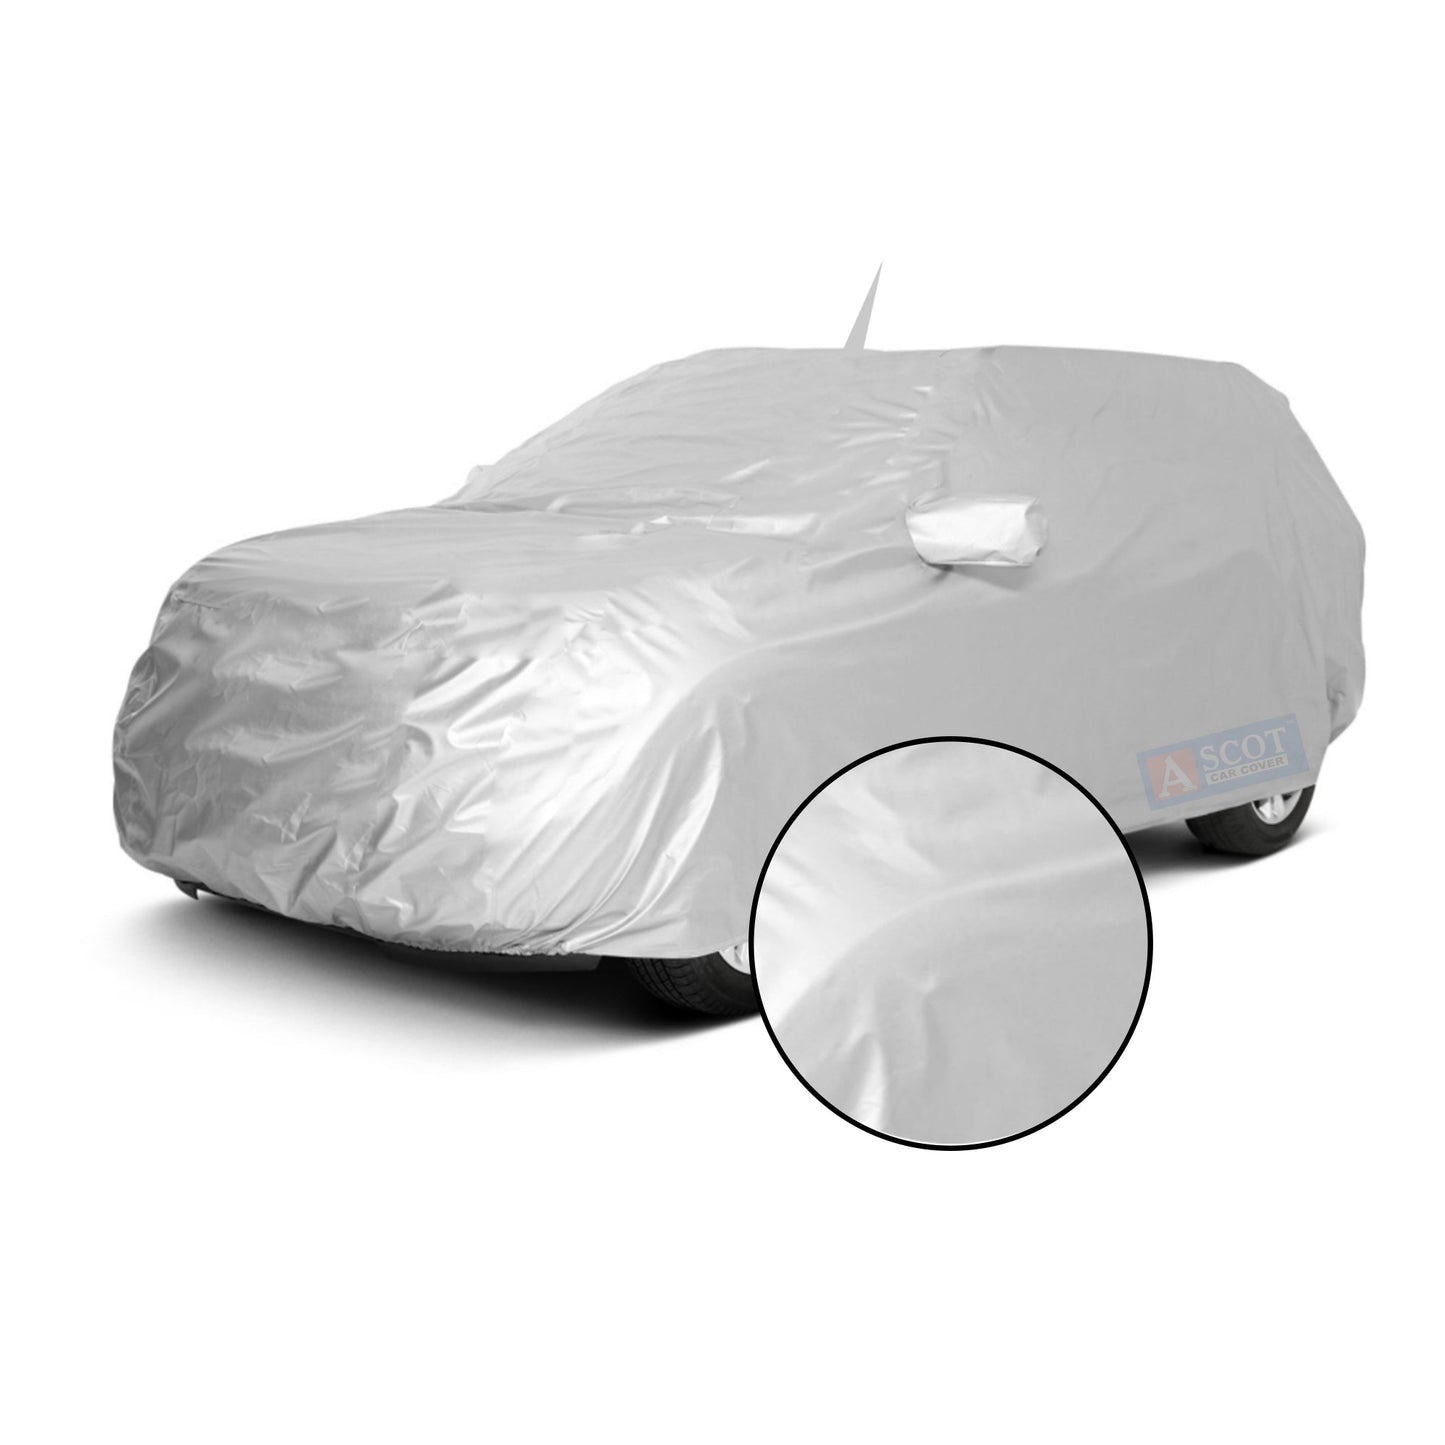 Ascot Audi RS 7 Sportback 2018-2023 Model Car Body Cover Dust Proof, Trippel Stitched